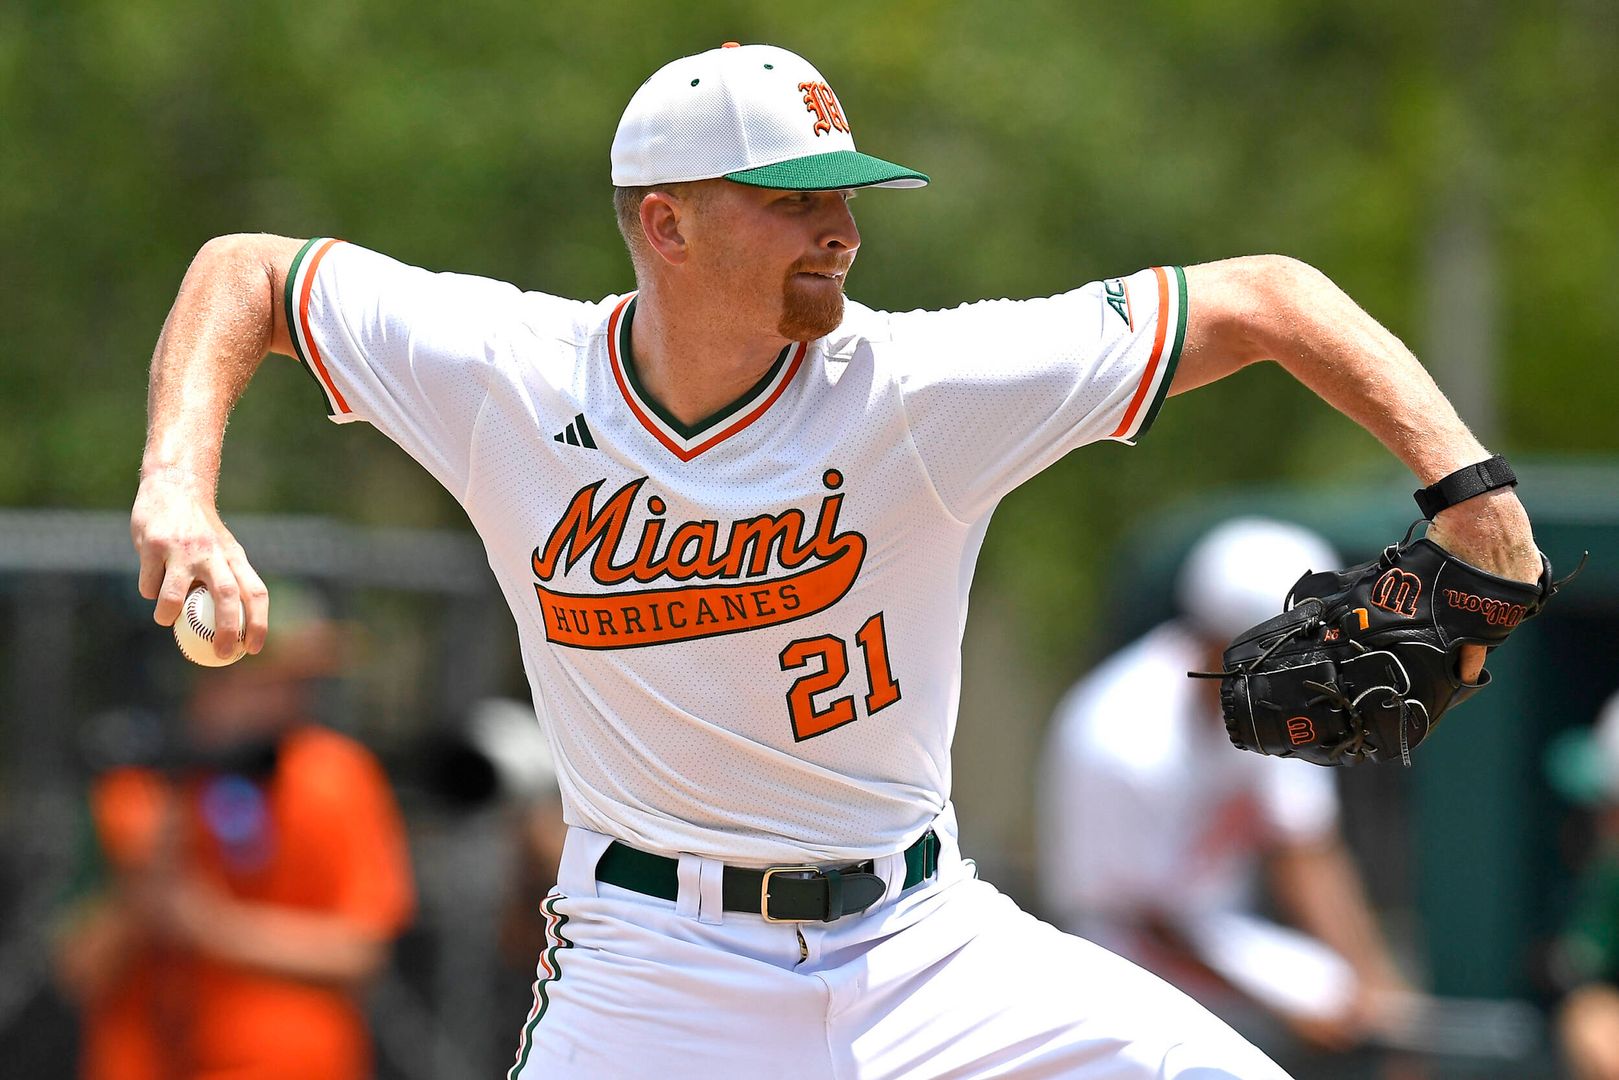 Seven Hurricanes Earn All-ACC Accolades